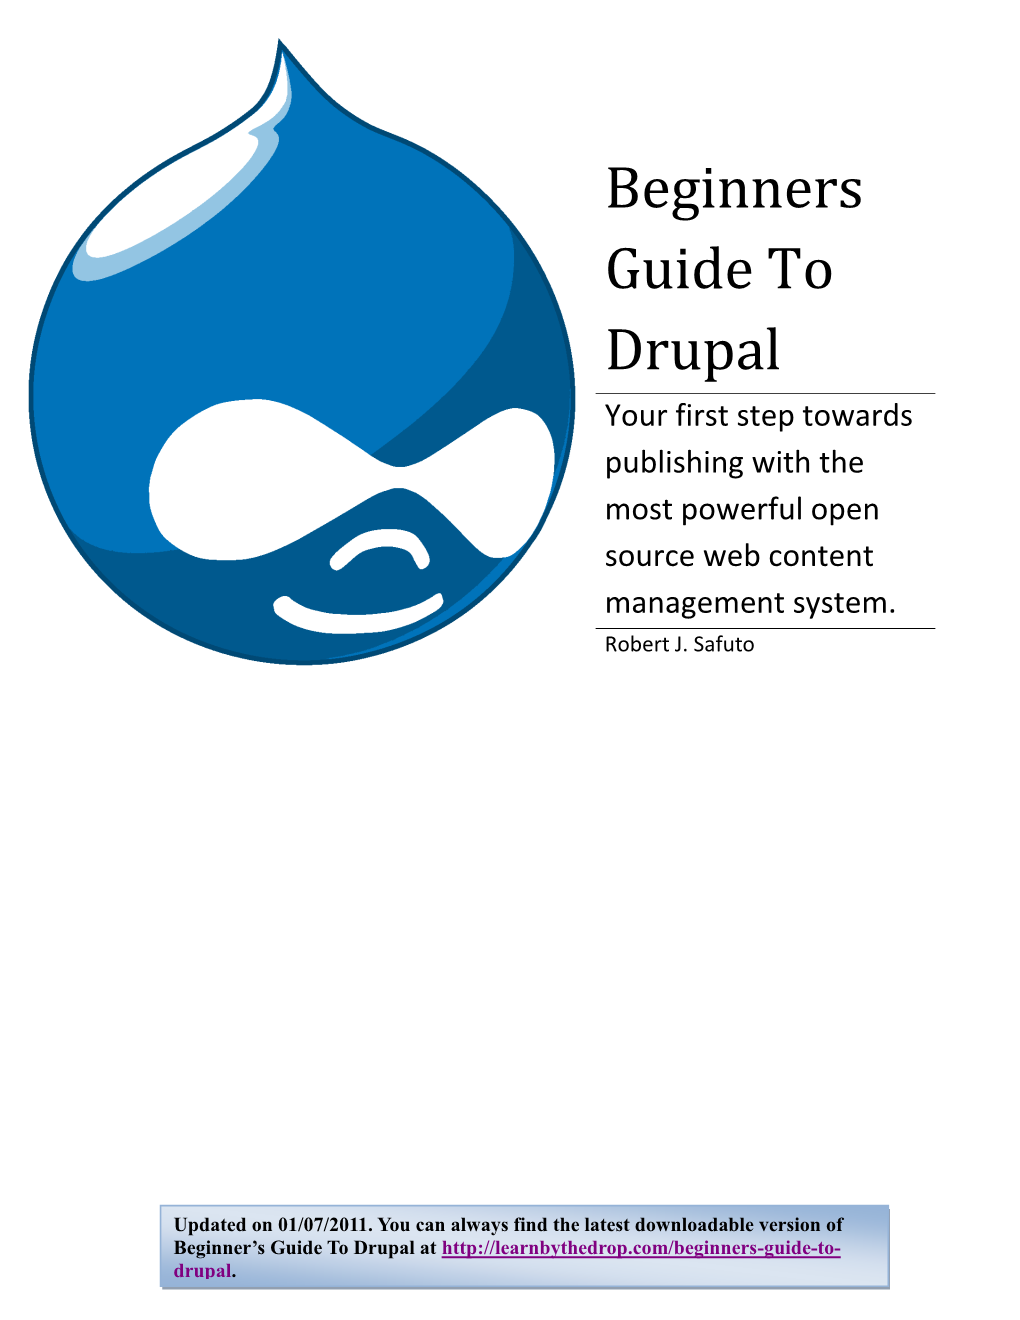 Beginners Guide to Drupal Your First Step Towards Publishing with the Most Powerful Open Source Web Content Management System